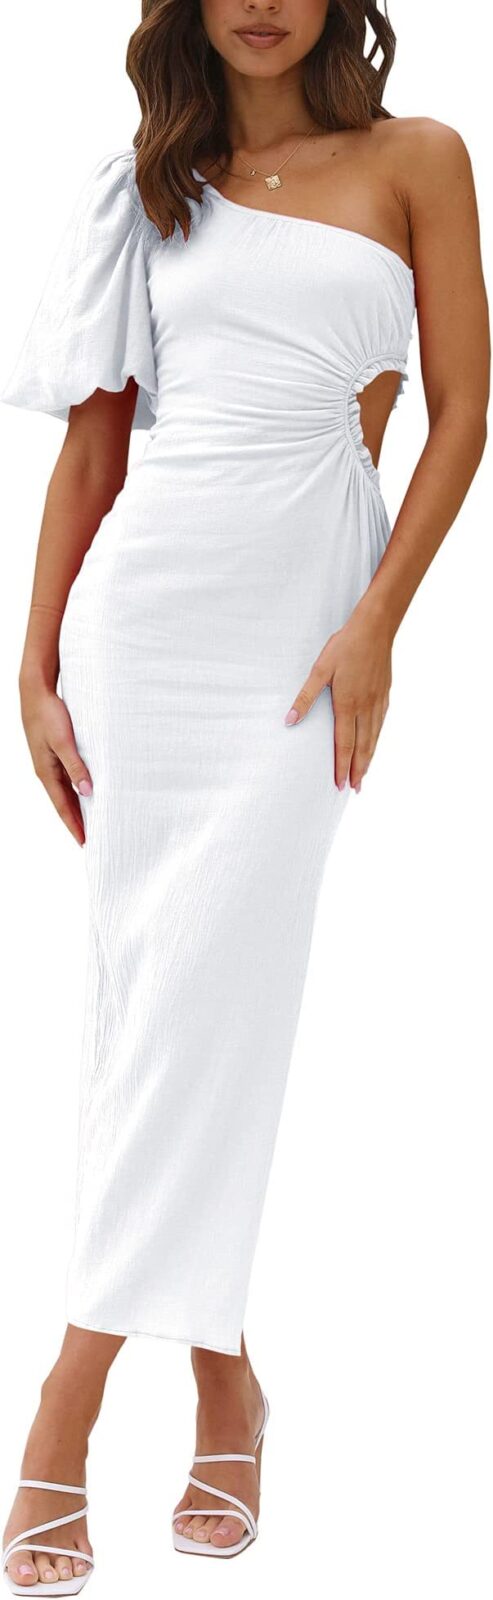 Little White Dresses For Your Bridal Shower or Engagement Party ...